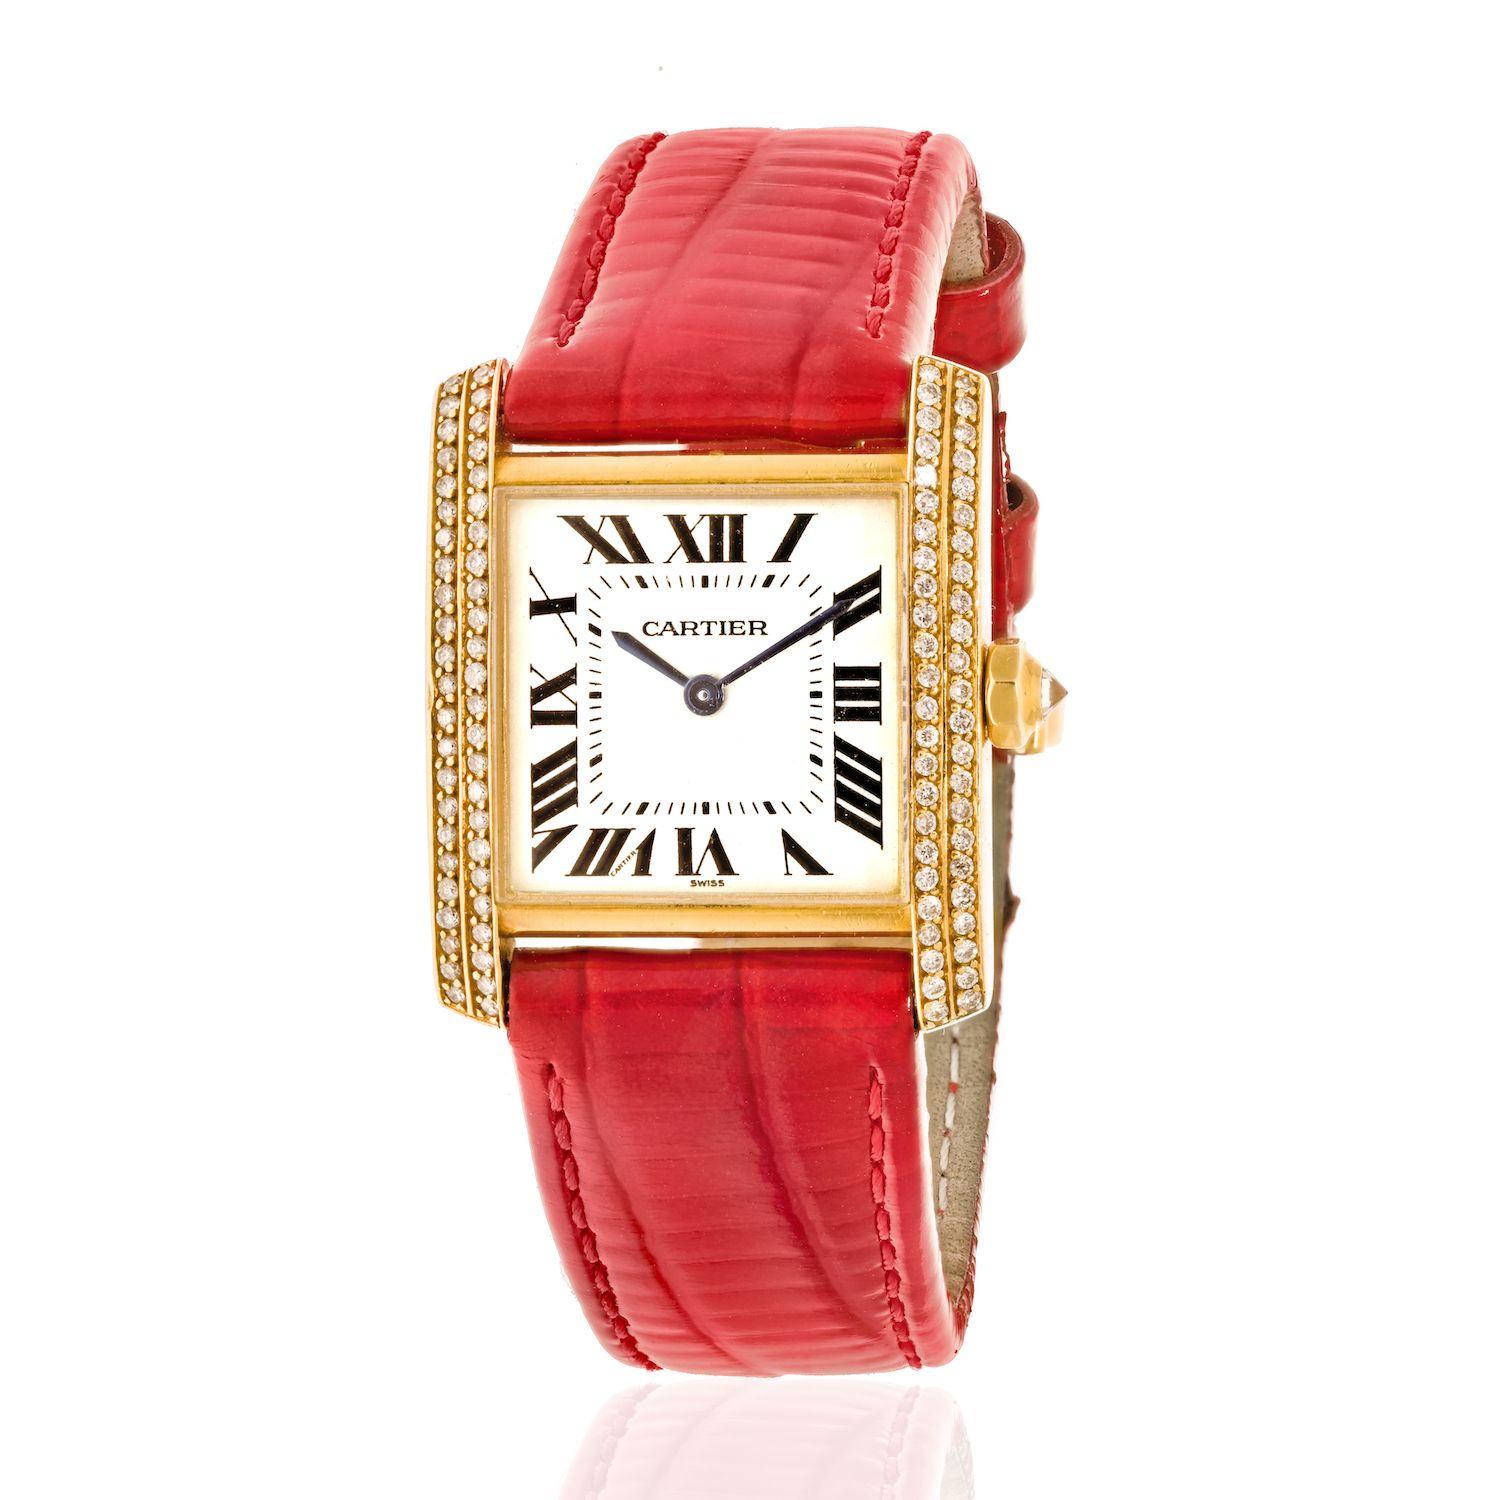 Modern Cartier 18K Yellow Gold Tank Francaise 25, Ref 1821 Ladies Diamond Watch For Sale